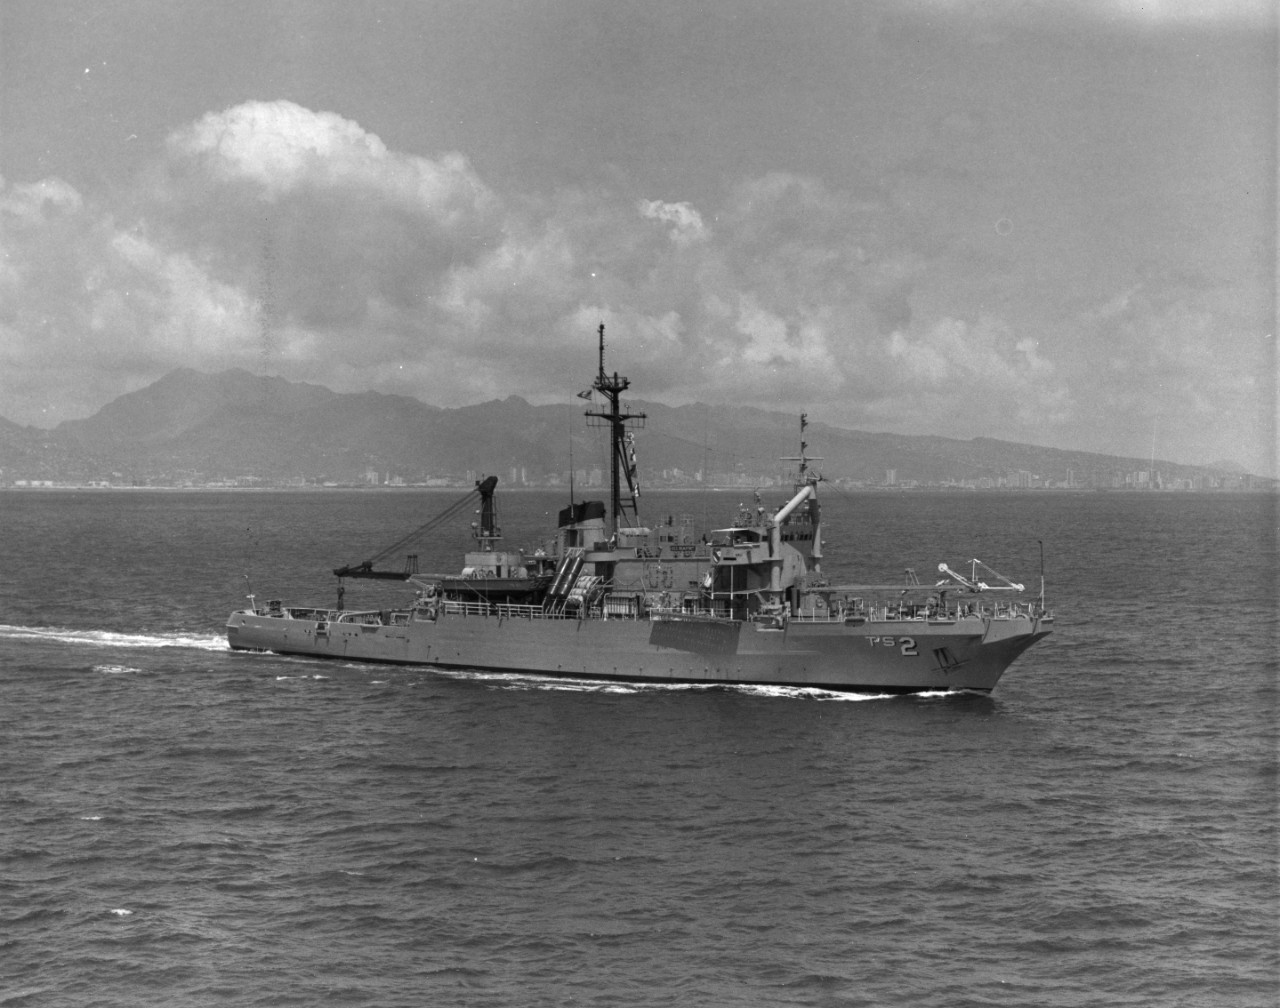 Salvage and rescue ship USS Beaufort (ATS-2)